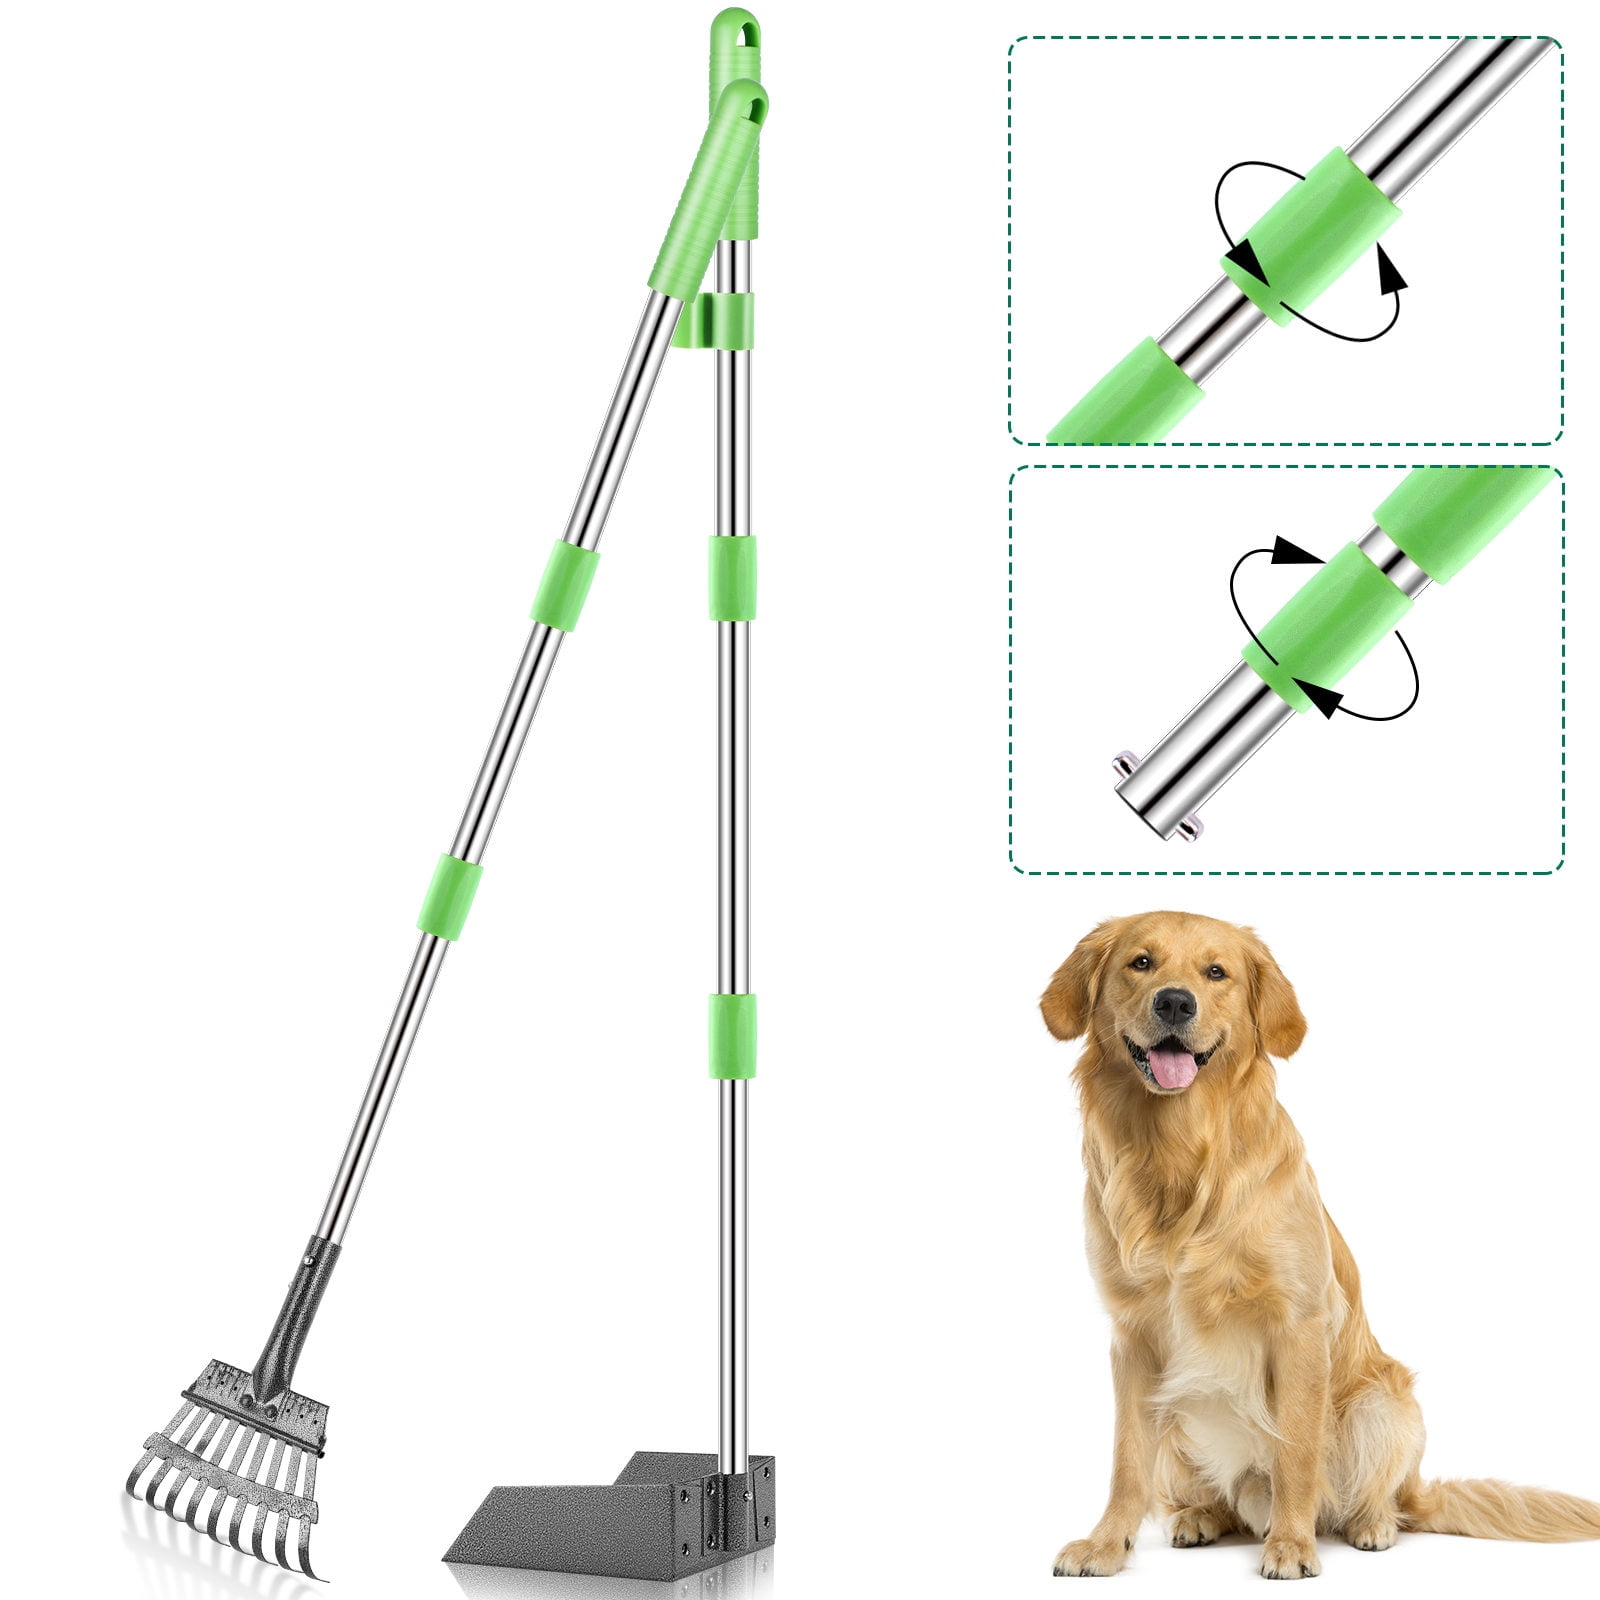 Medium Bodhi Dog Metal Long Handle Tray and Rake Pooper Scooper Great for Grass XL Pets Large Street and Gravel Perfect for Small